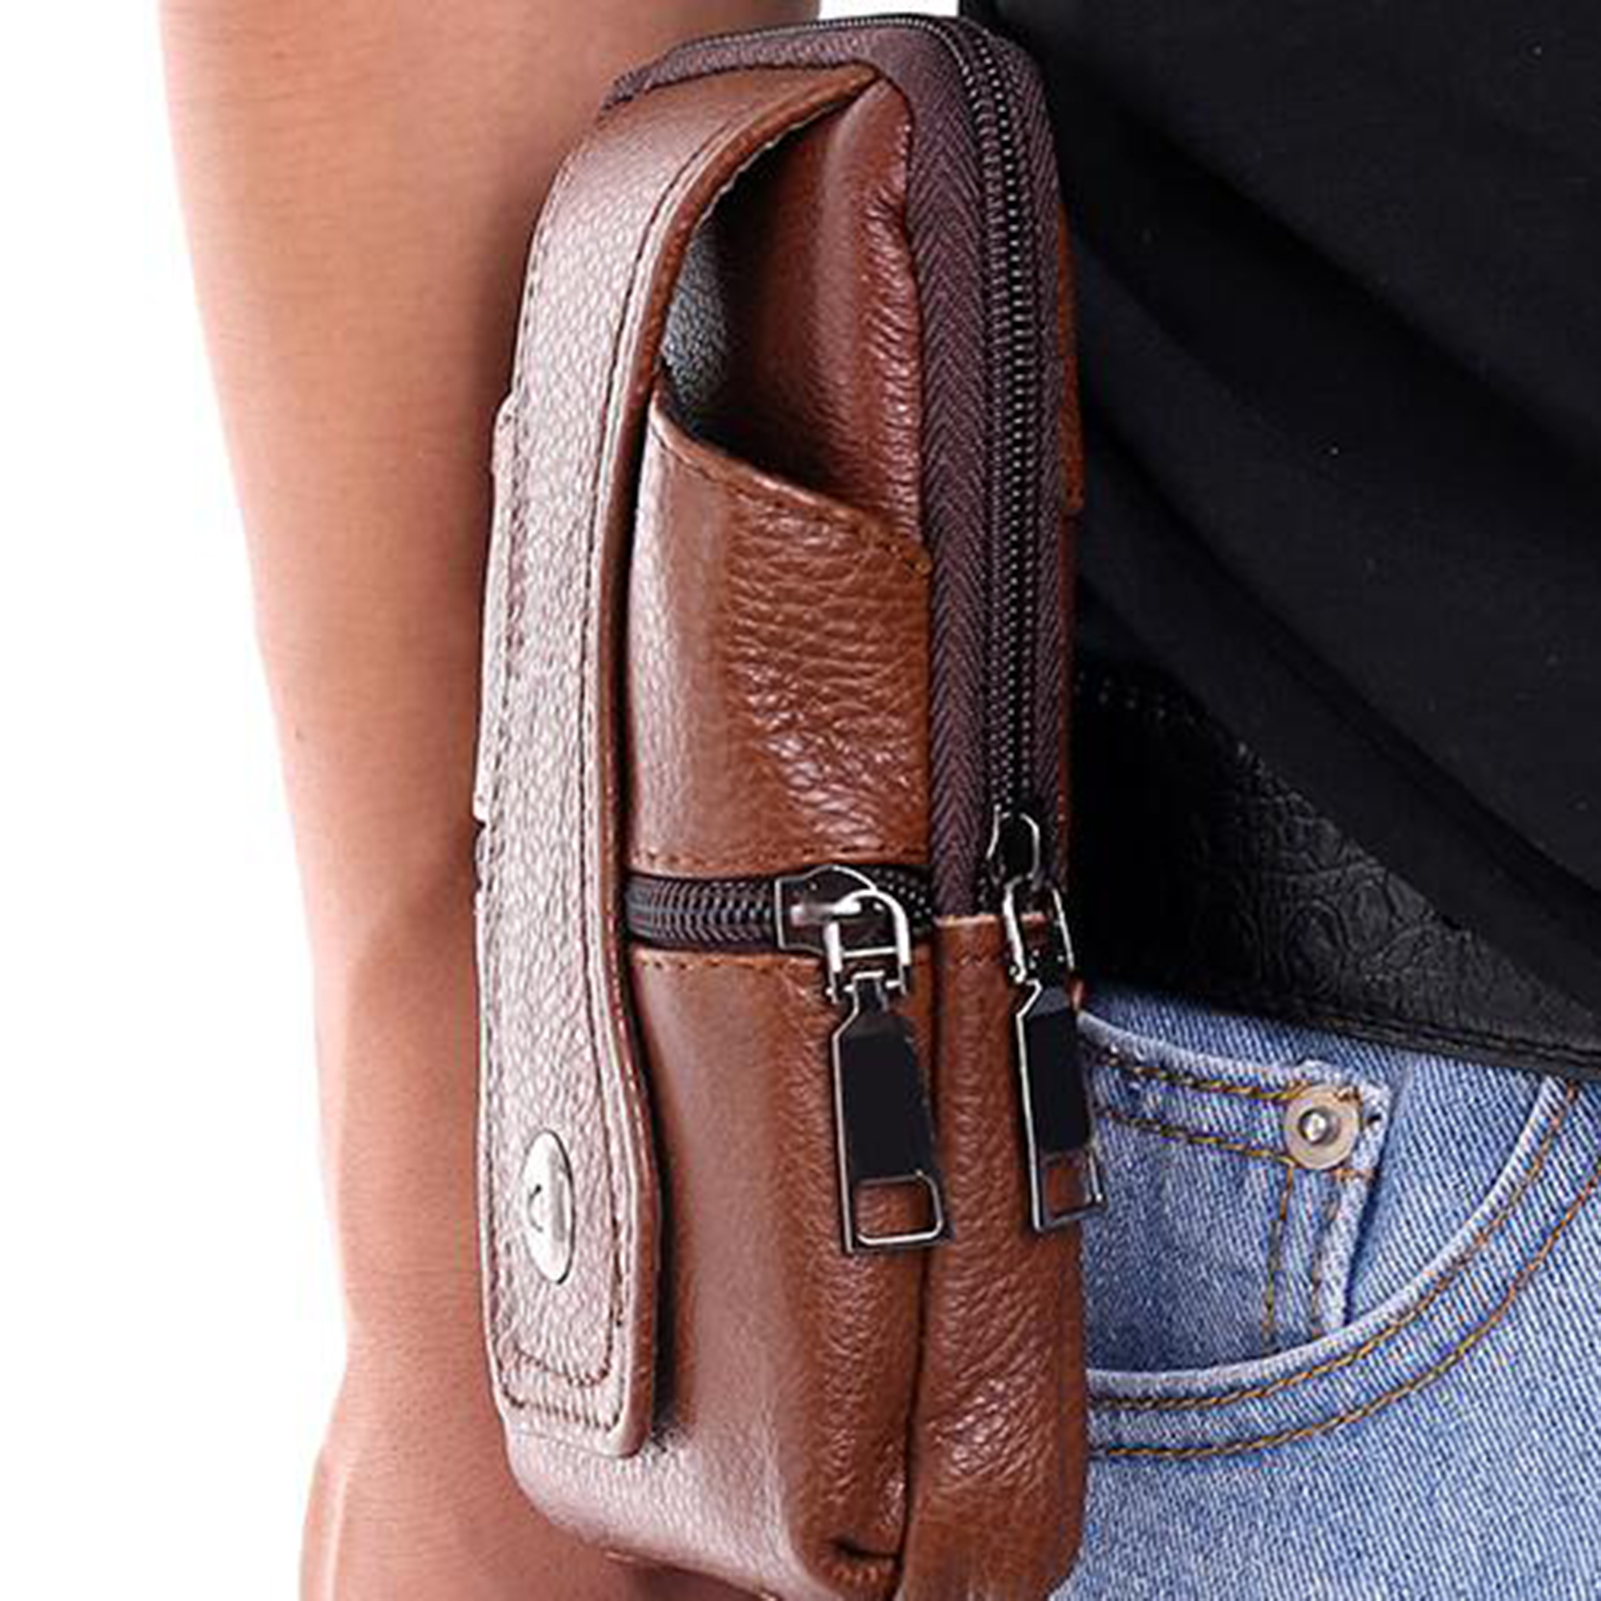 Yirtree Small Leather Belt Bag Phone Wallet Purse for Men Loop Holster Case Waist Pack Travel Messenger Pouch with Hook Men Outdoor Faux Leather Belt Waist Bag Mobile Phone Card Holder - image 3 of 8